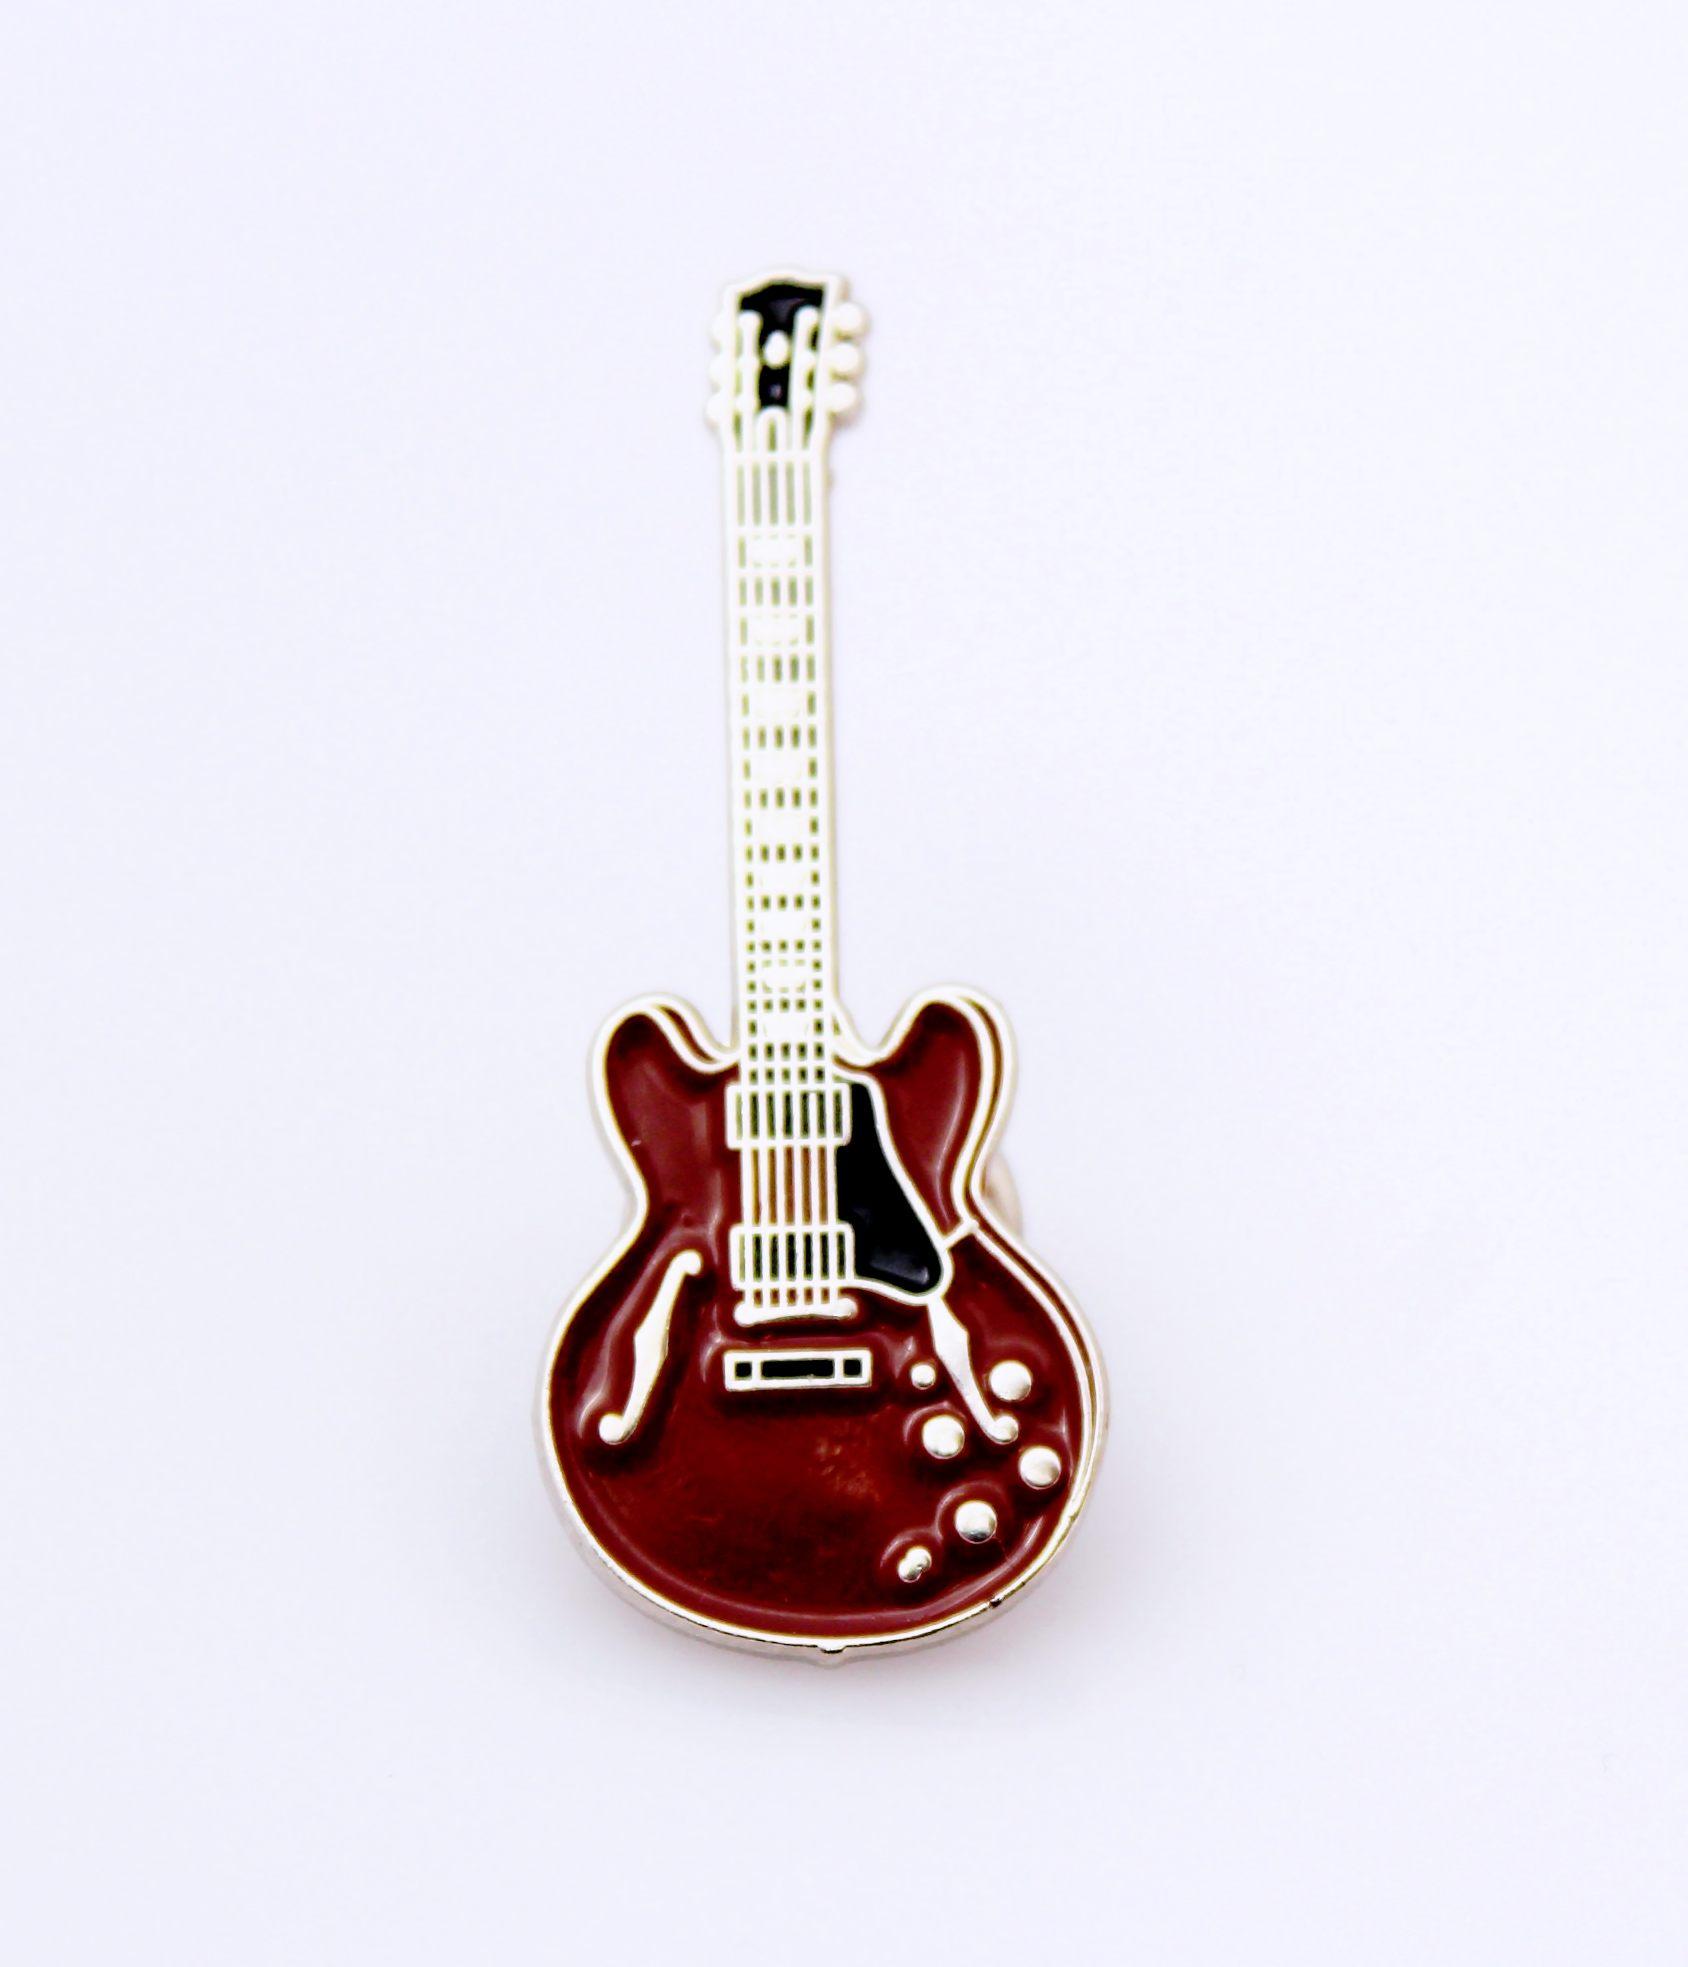 Gibson ES 335  Pin Badge - Sixties Cherry Stain Colour